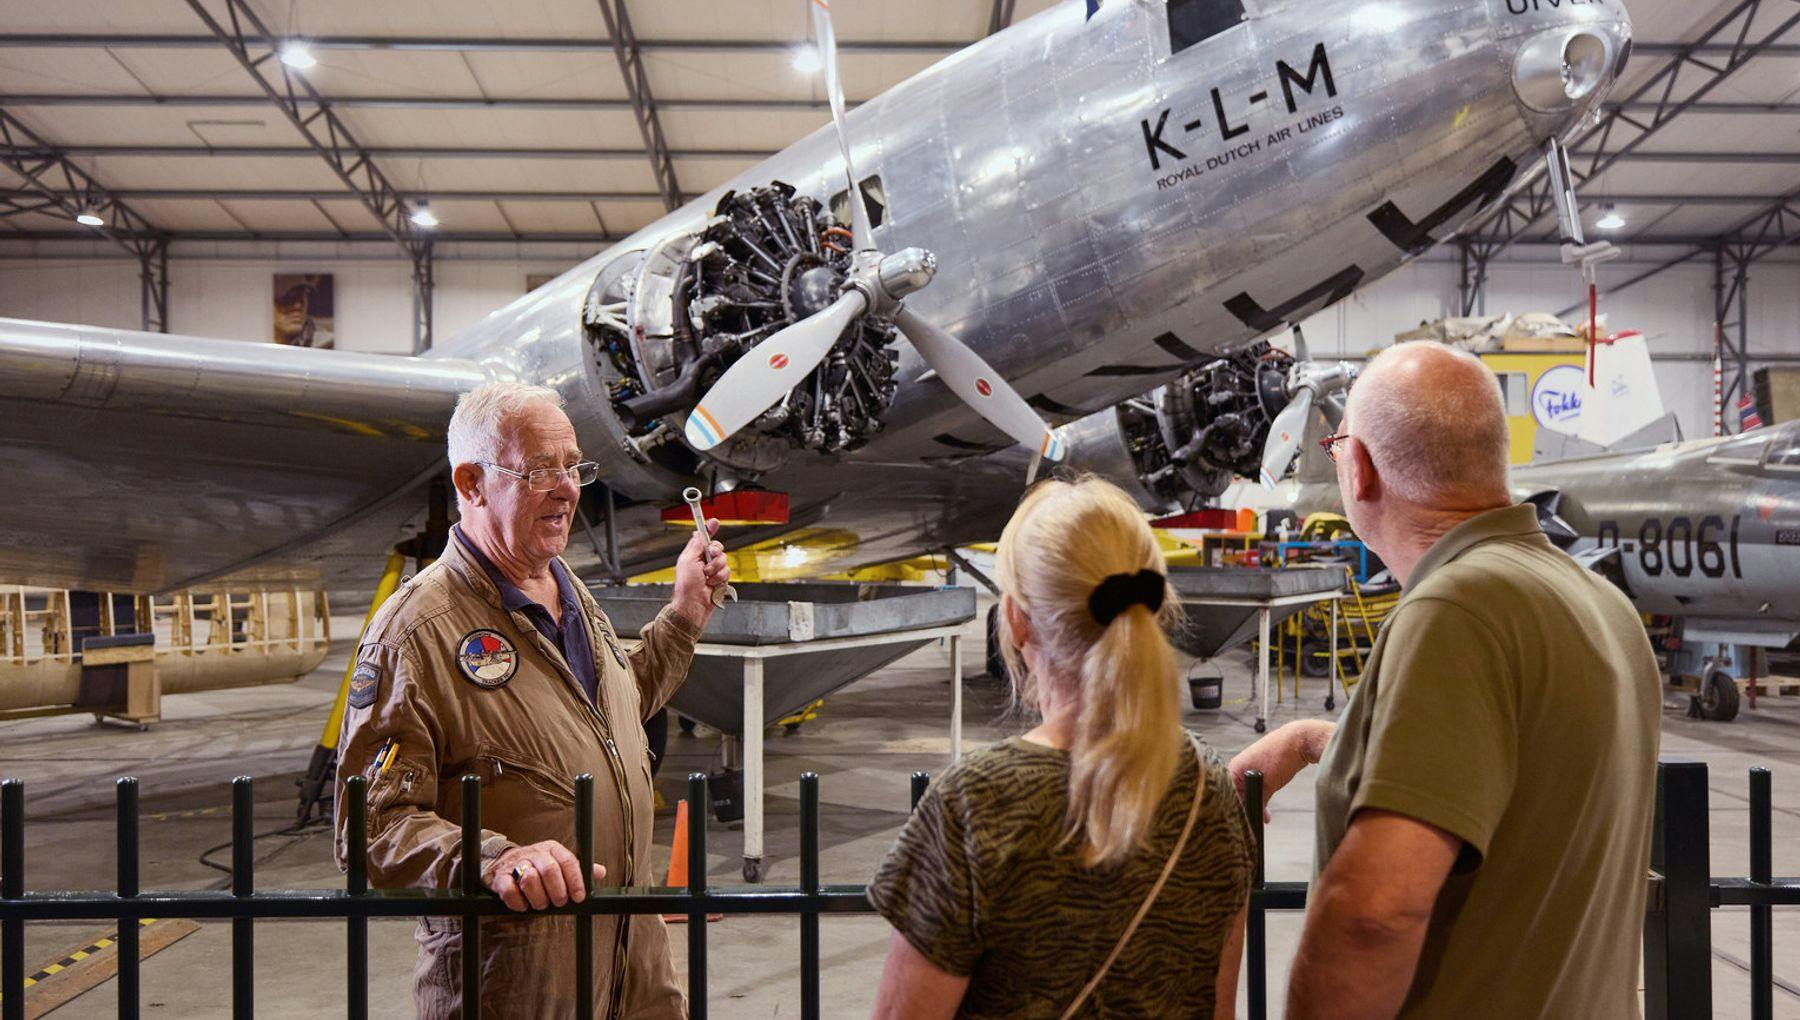 Adults looking at an exhibit at Aviodrome Museum in Lelystad